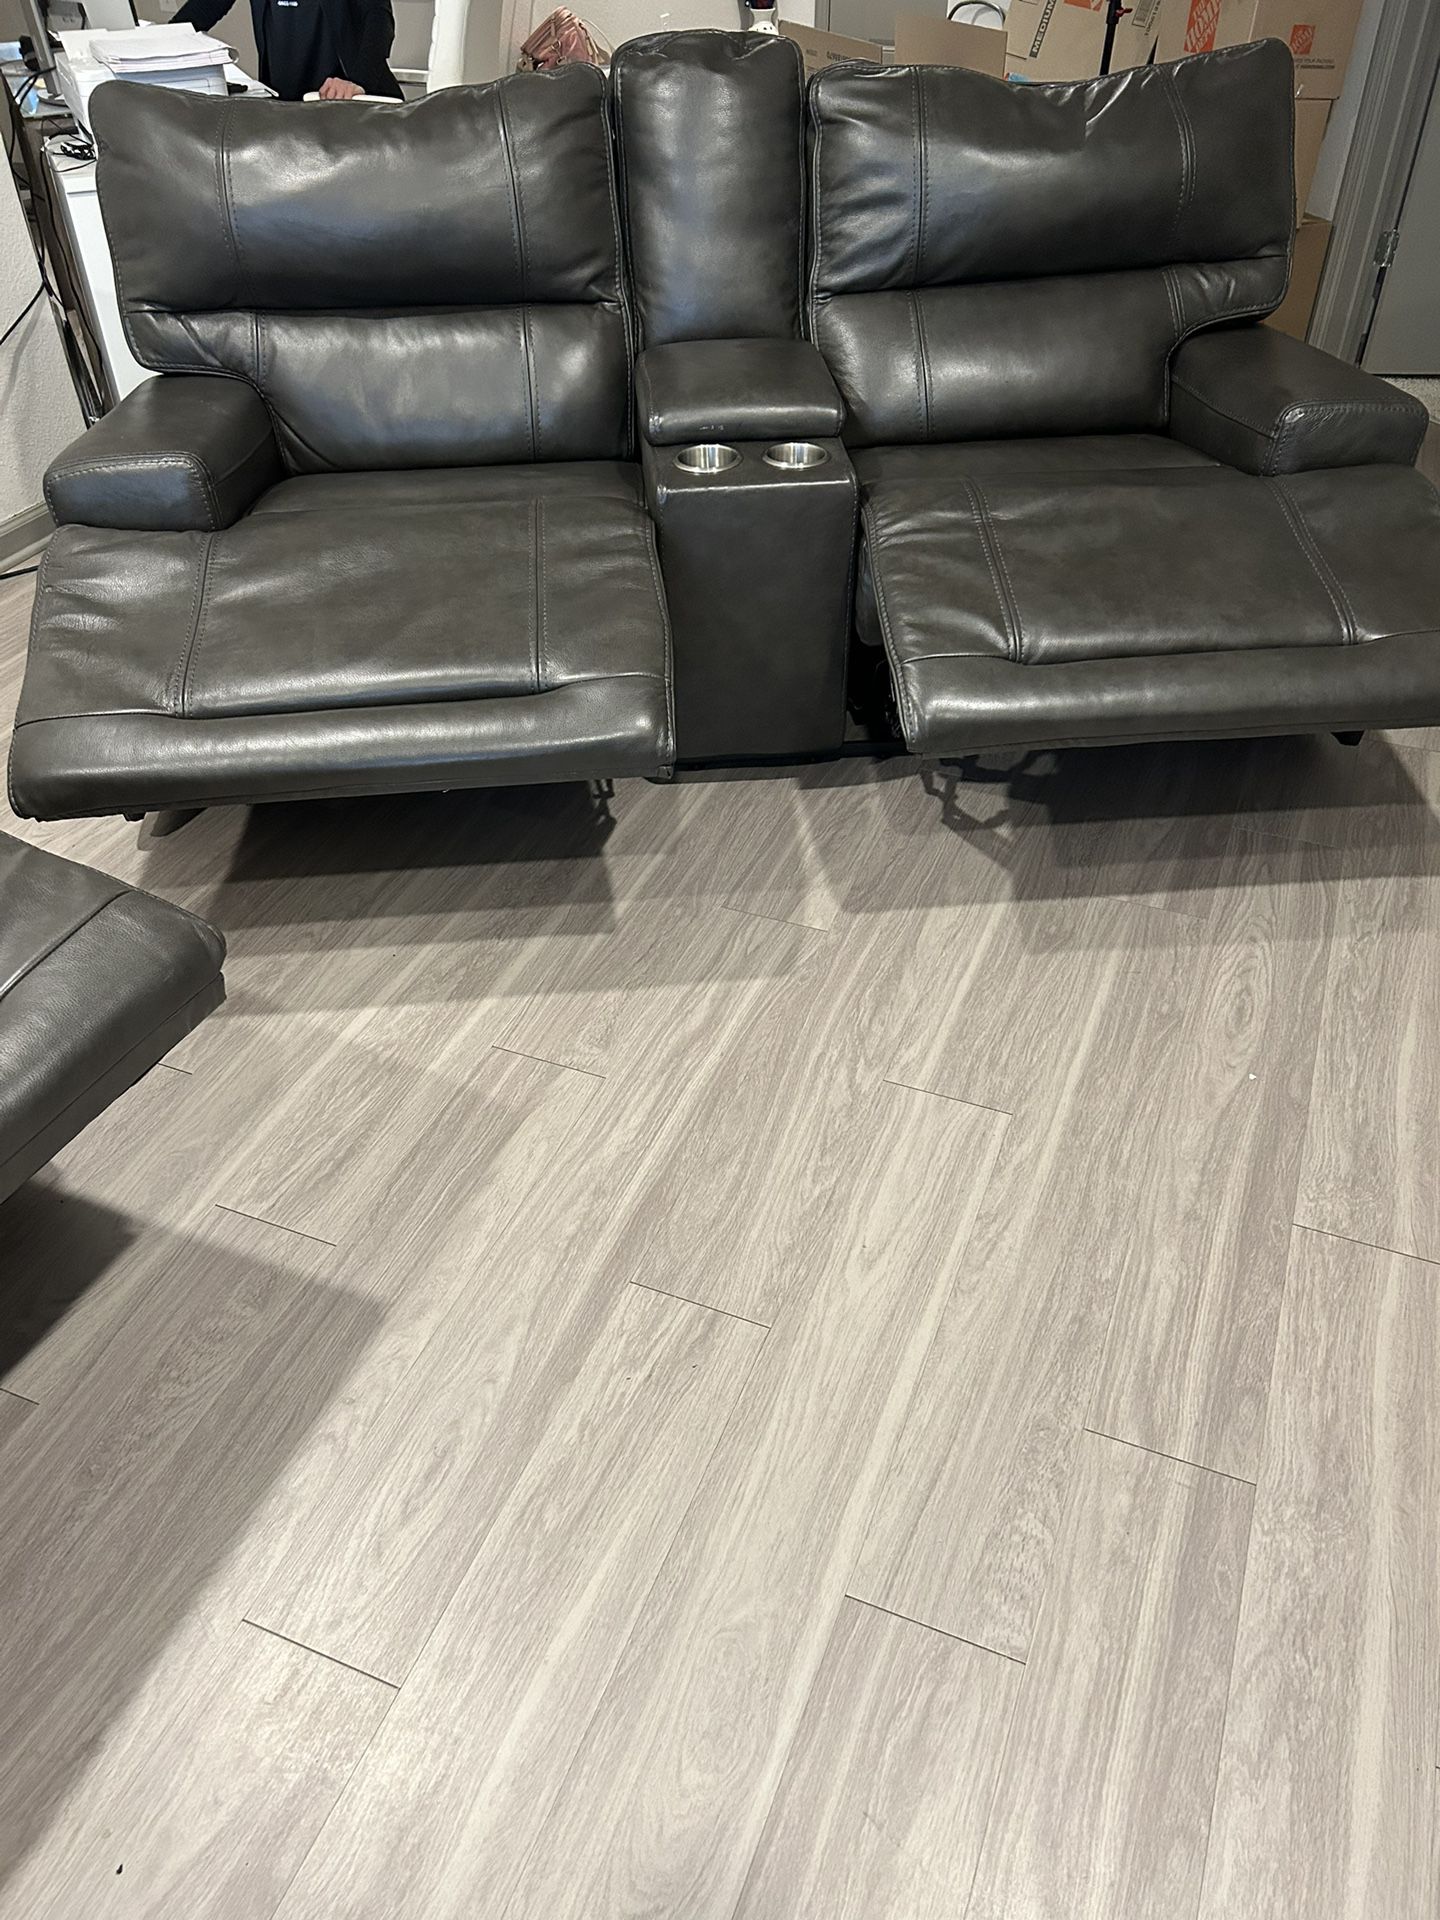 Like New Reclining Leather Couches